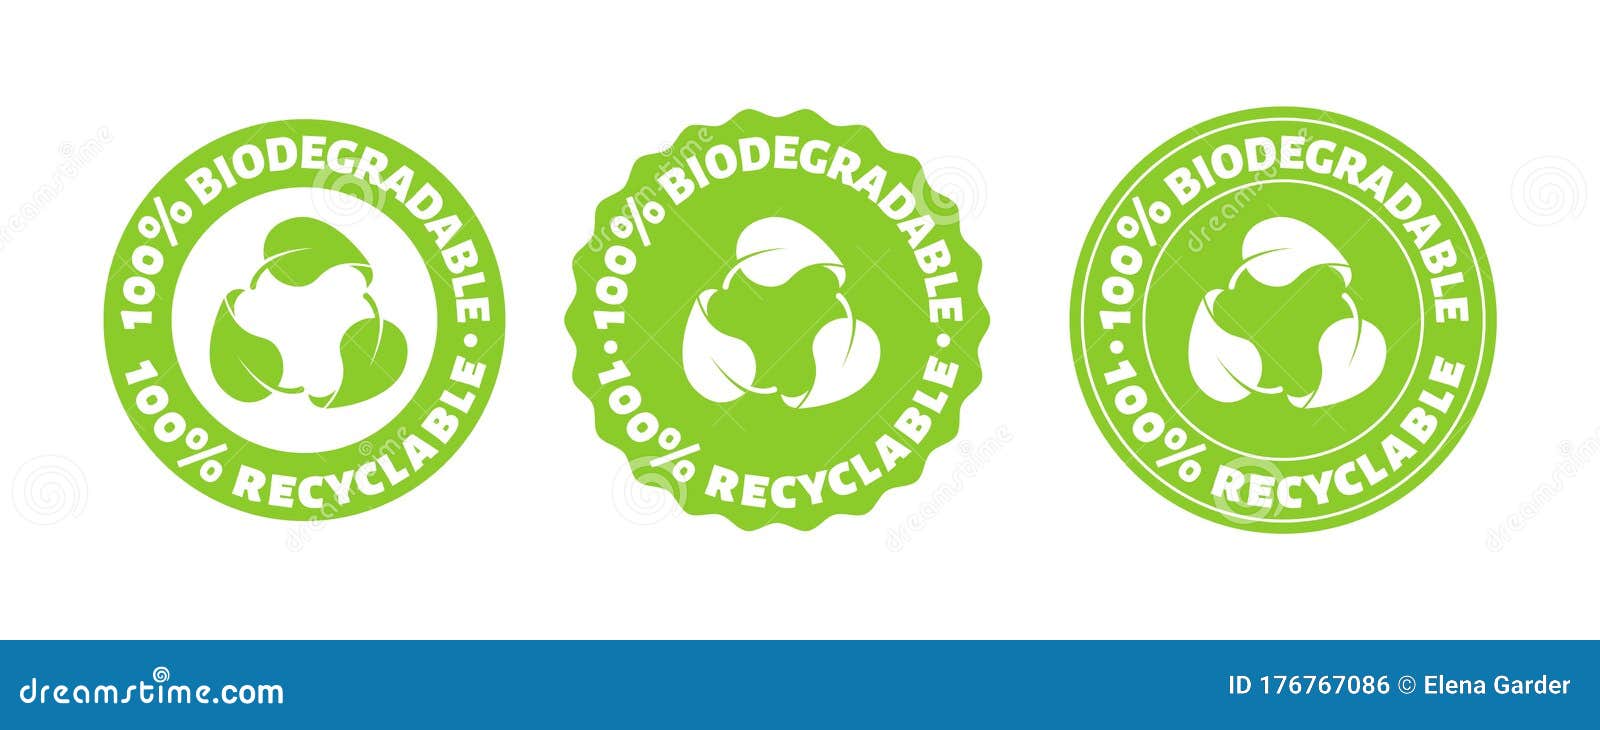 100 persent biodegradable recycle stamp.  reusable plastic bio package logo icon set. eco sign